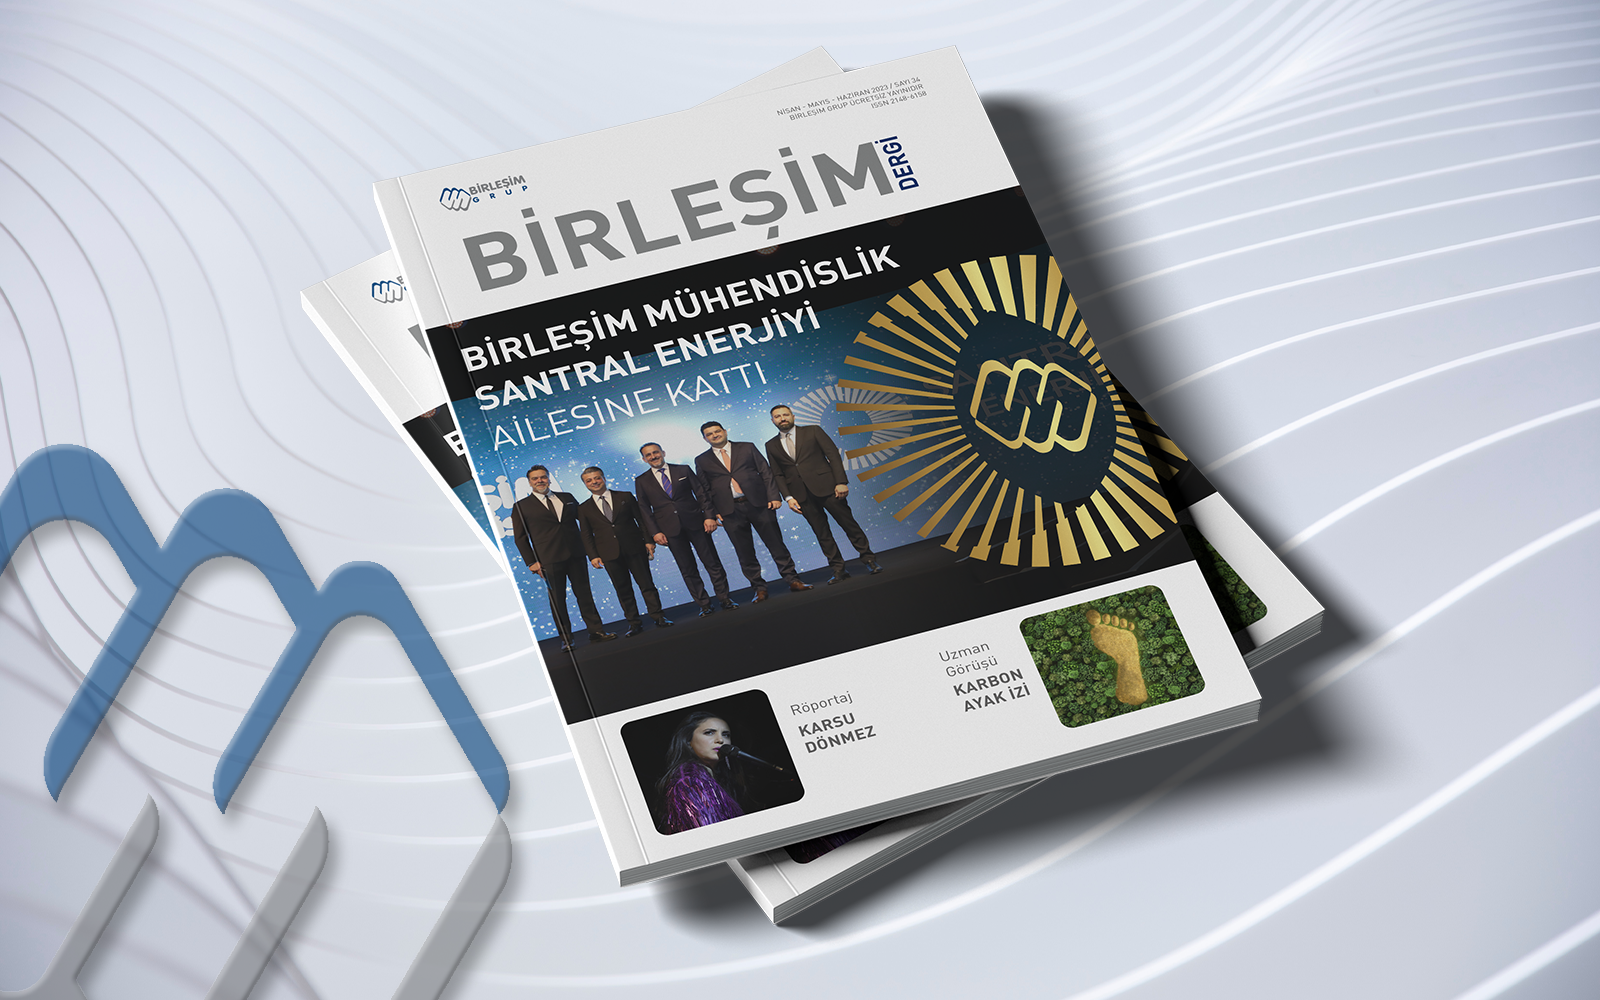 34th issue of Birleşim Dergi has been published